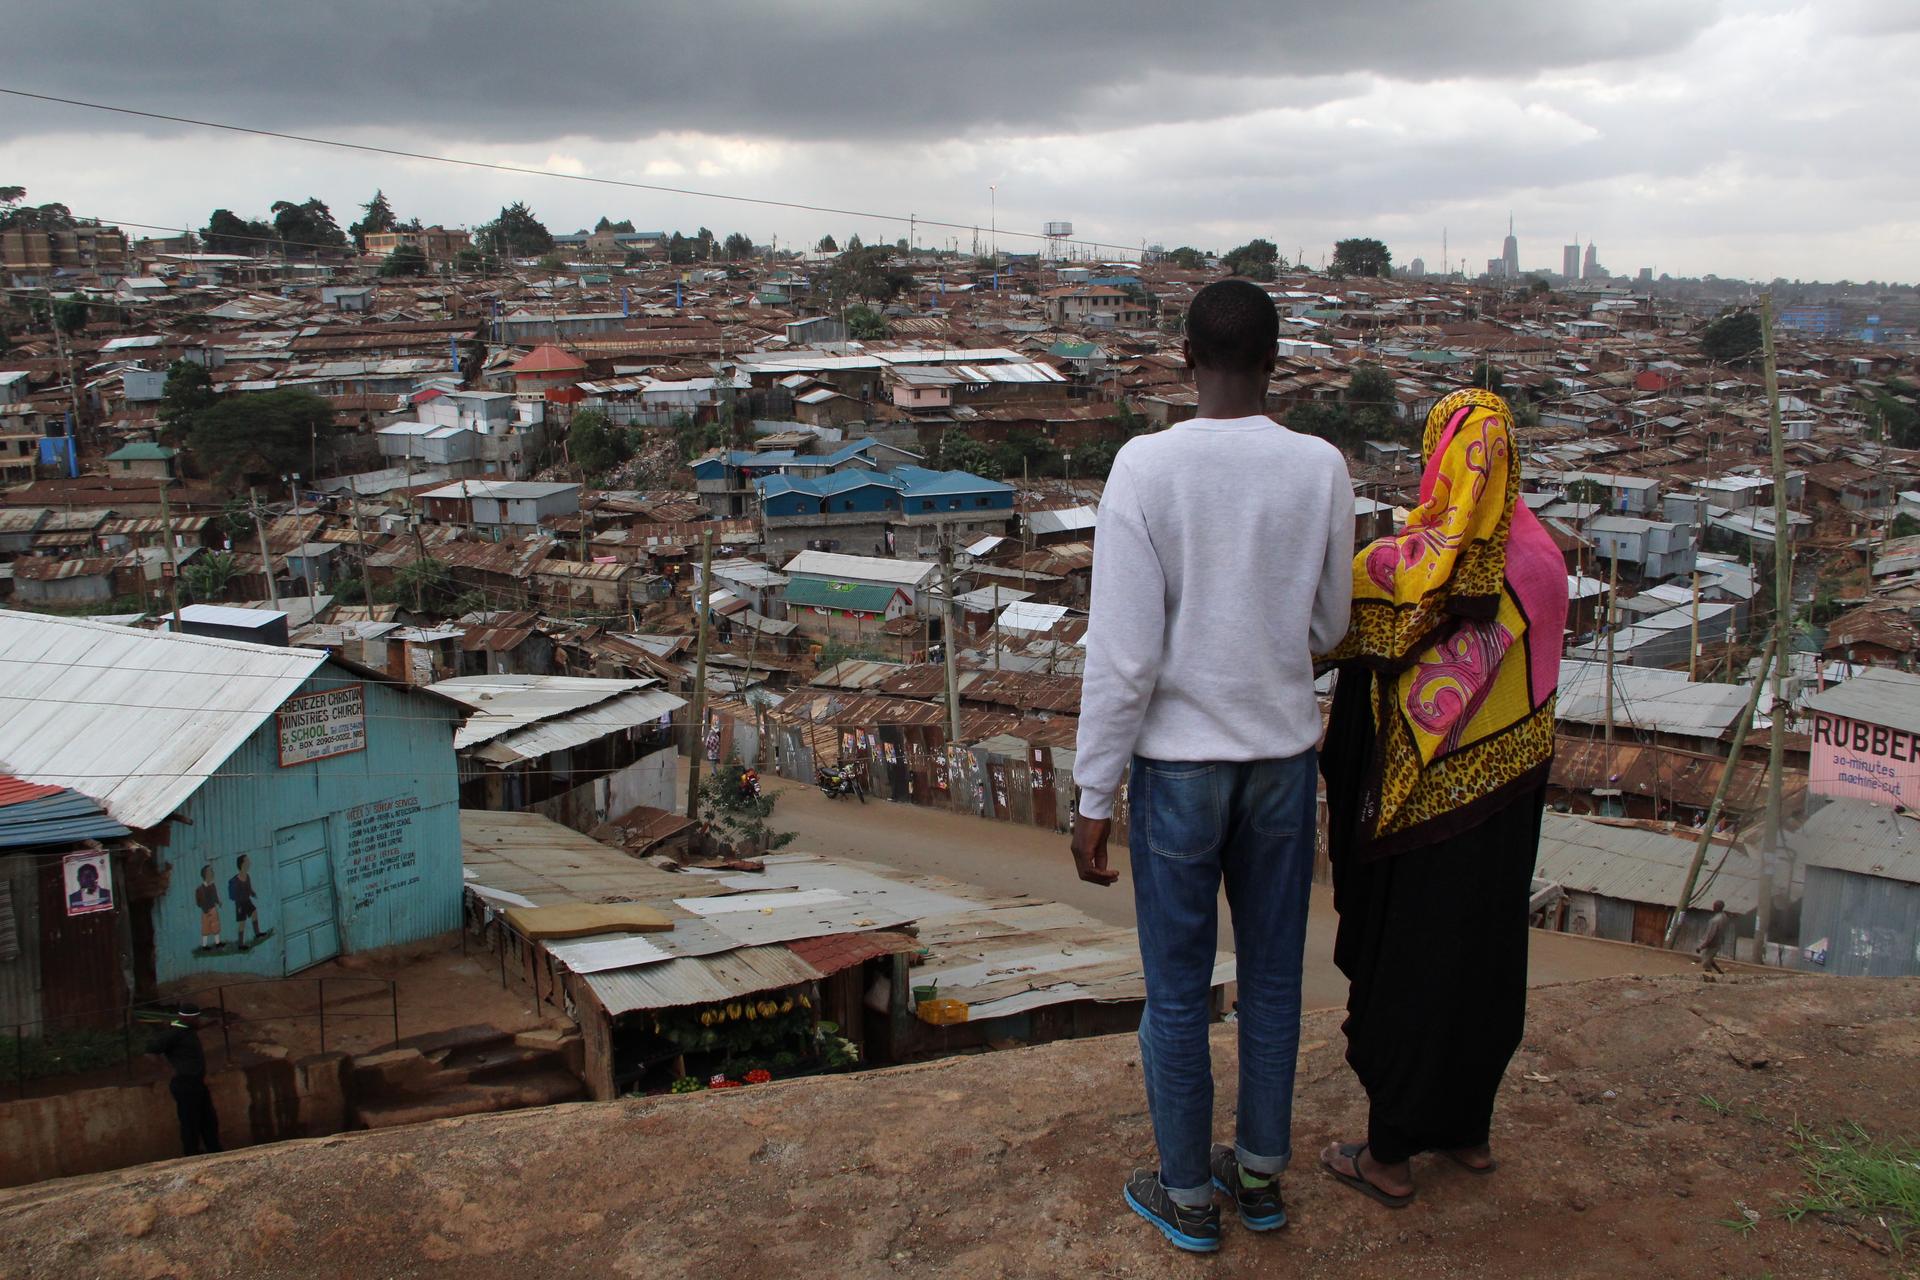 Ben and Salma are Kenyan students studying journalism at the Nairobi community news hub, Habari Kibra. They are looking out over their home town, Kibera, one of the largest slums in the world. 